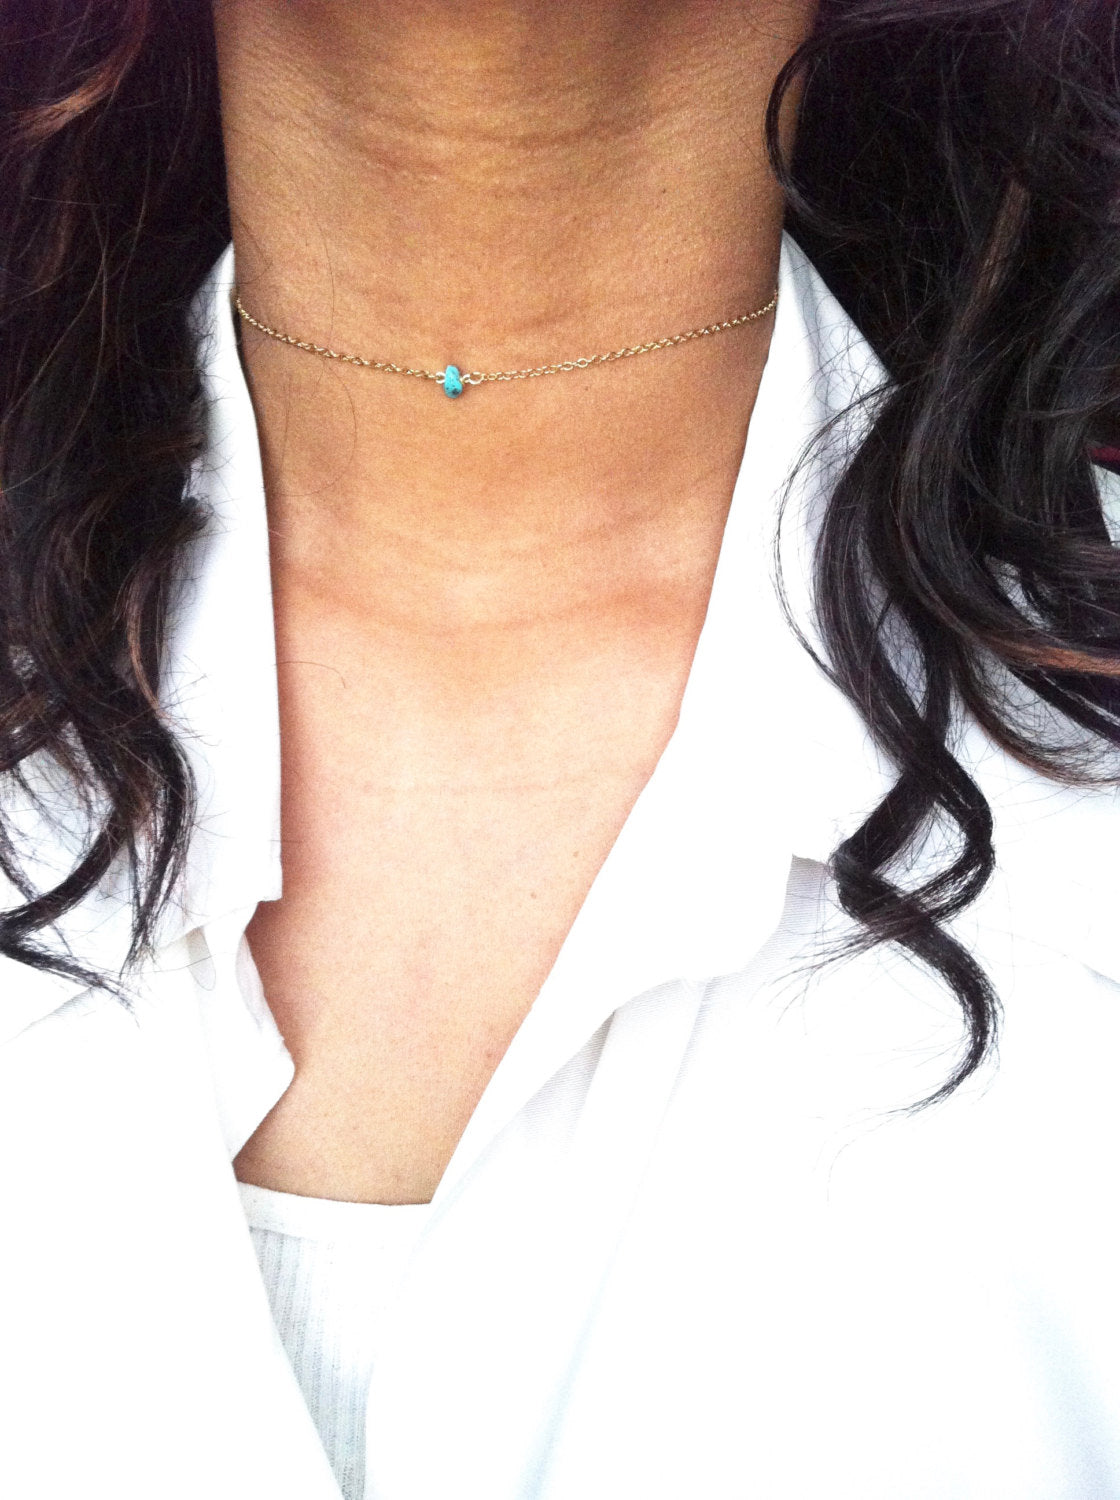 Simple Turquoise Thin Chain Choker Necklace | IB Jewelry